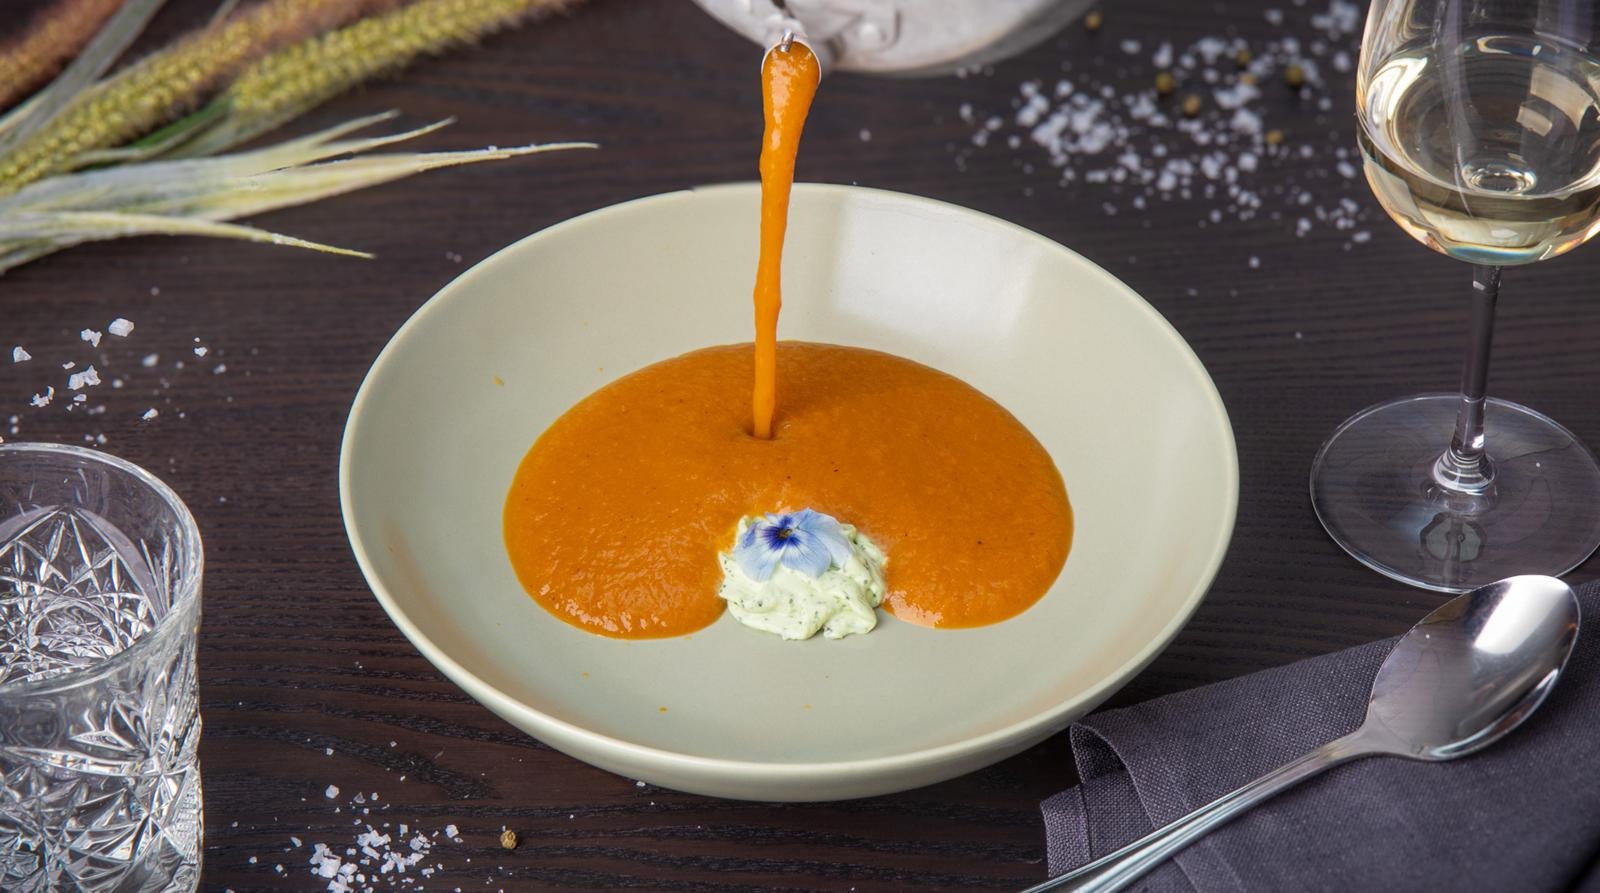 Sea buckthorn and carrot soup with herb mousse